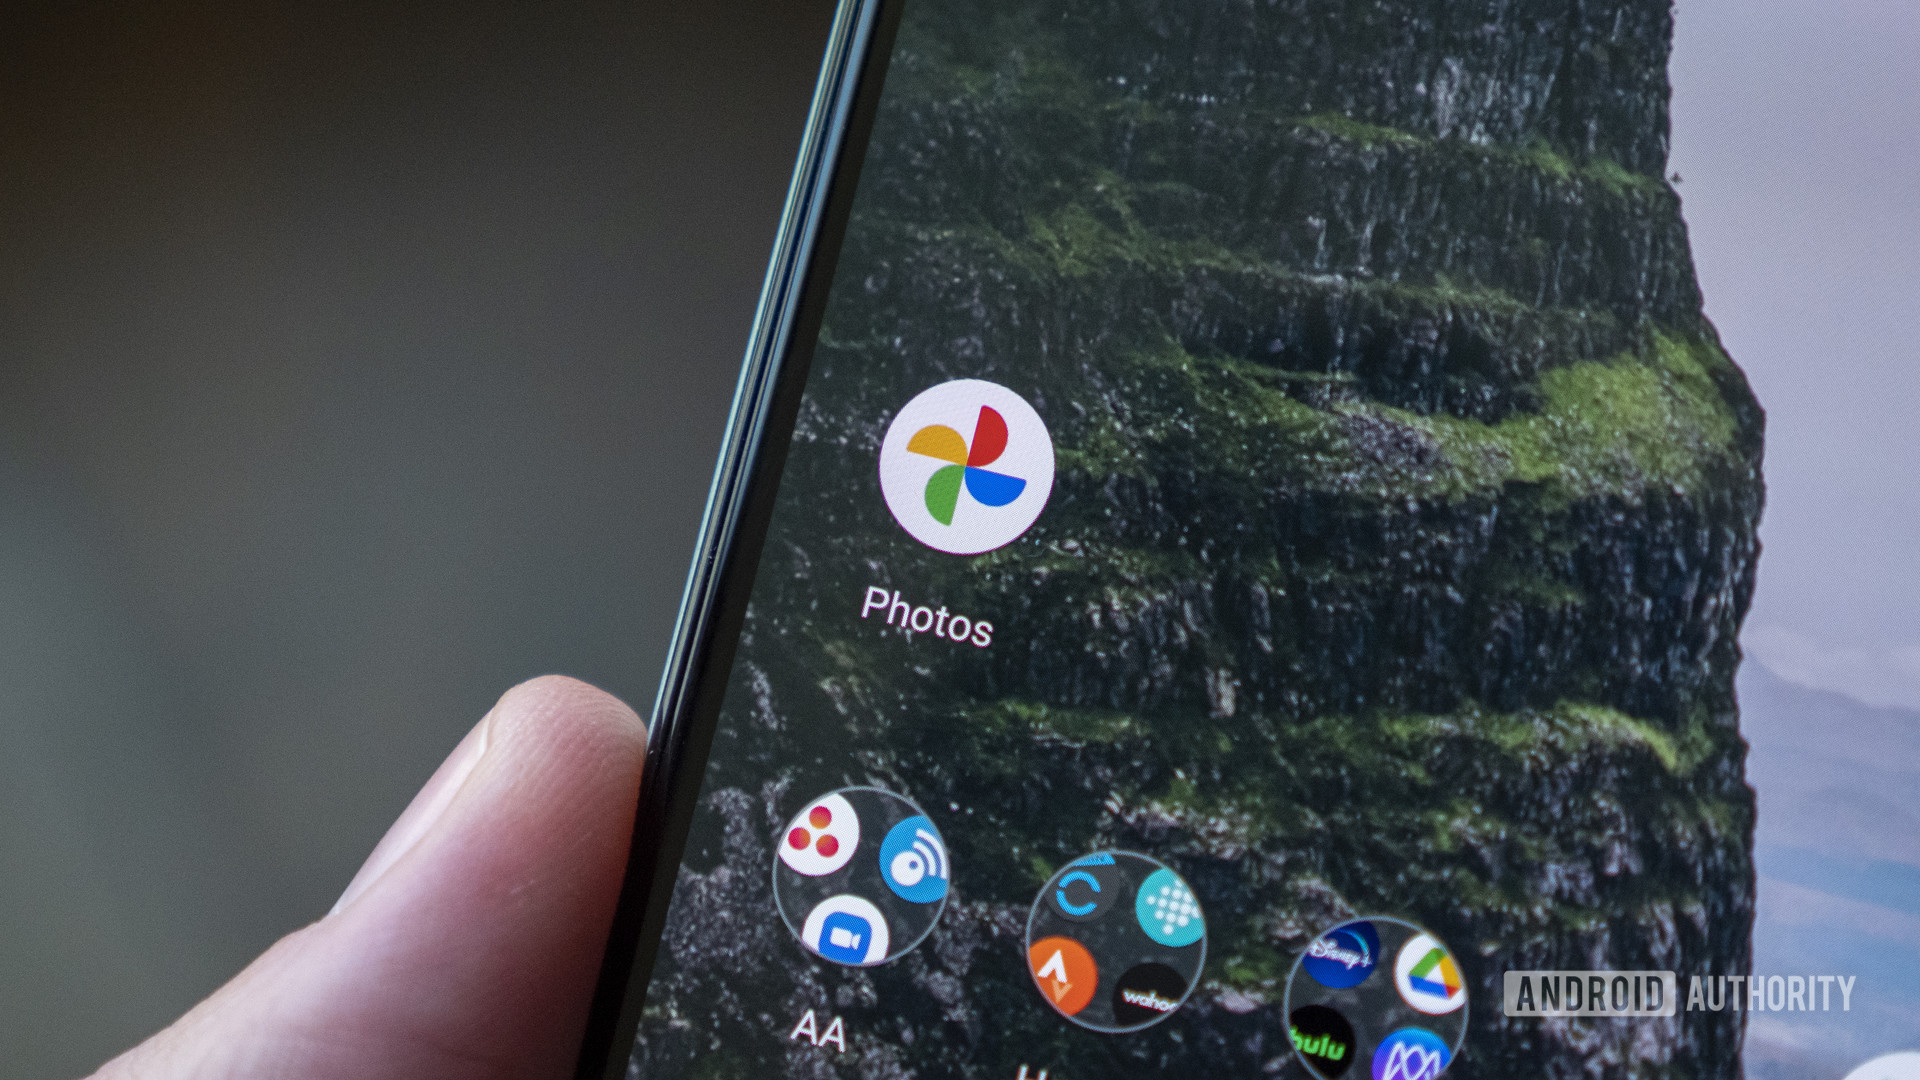 Google Photos storage: Here's what you need to know